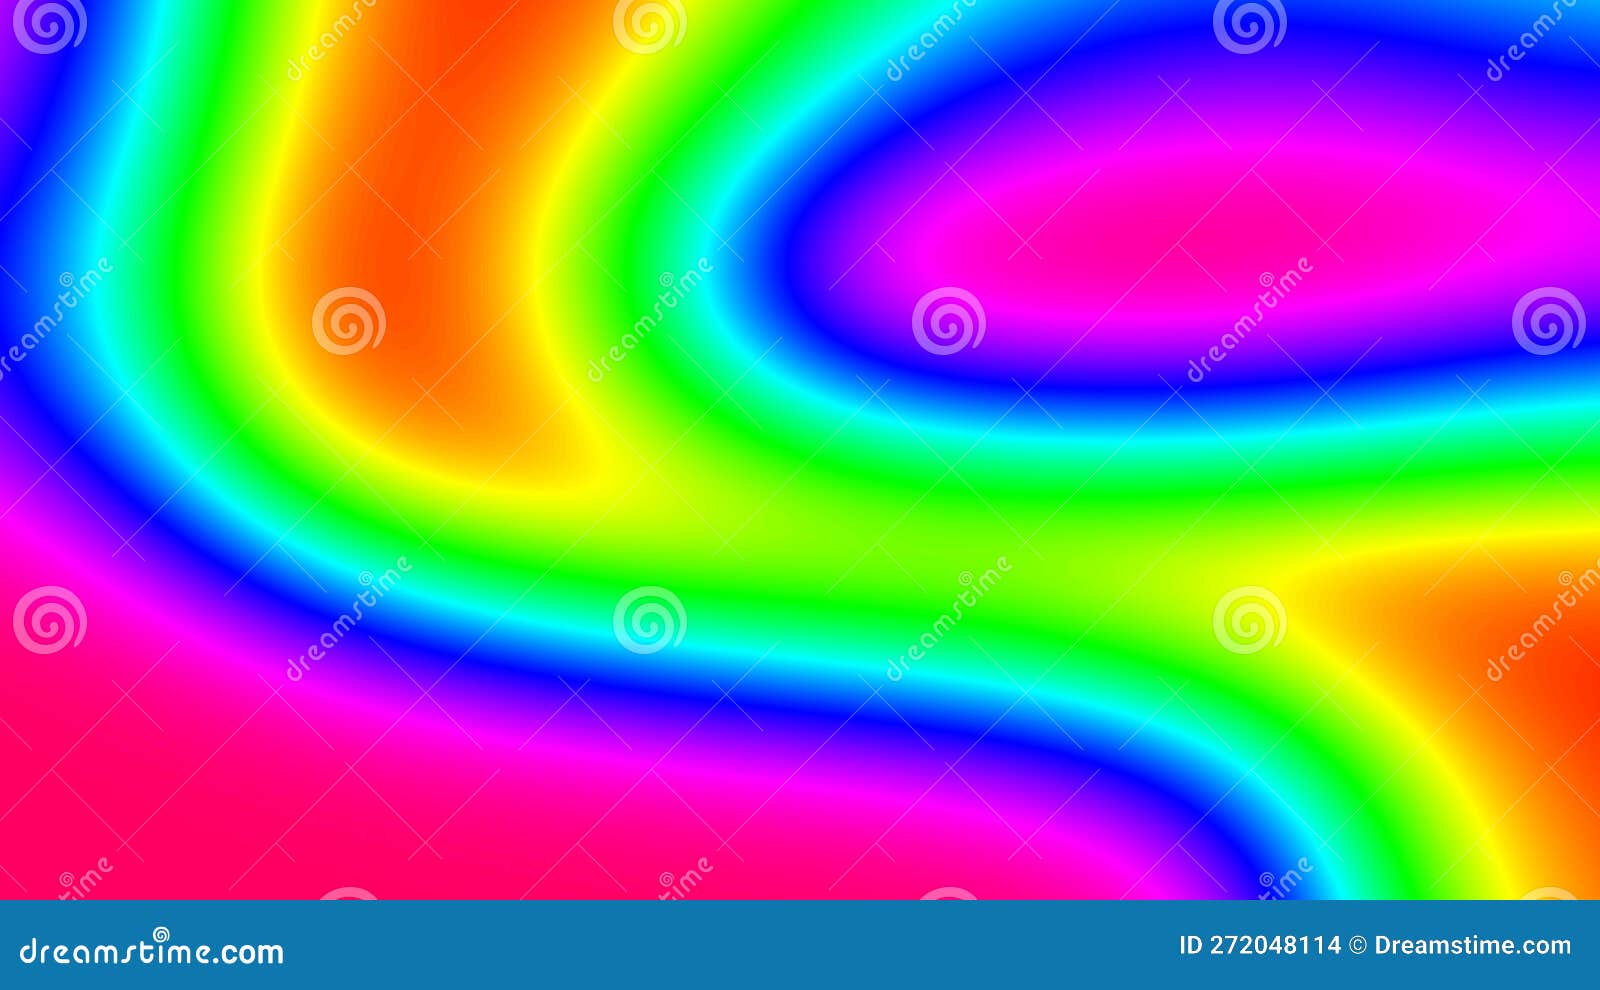 curvy gradient colorize wavy abstract background